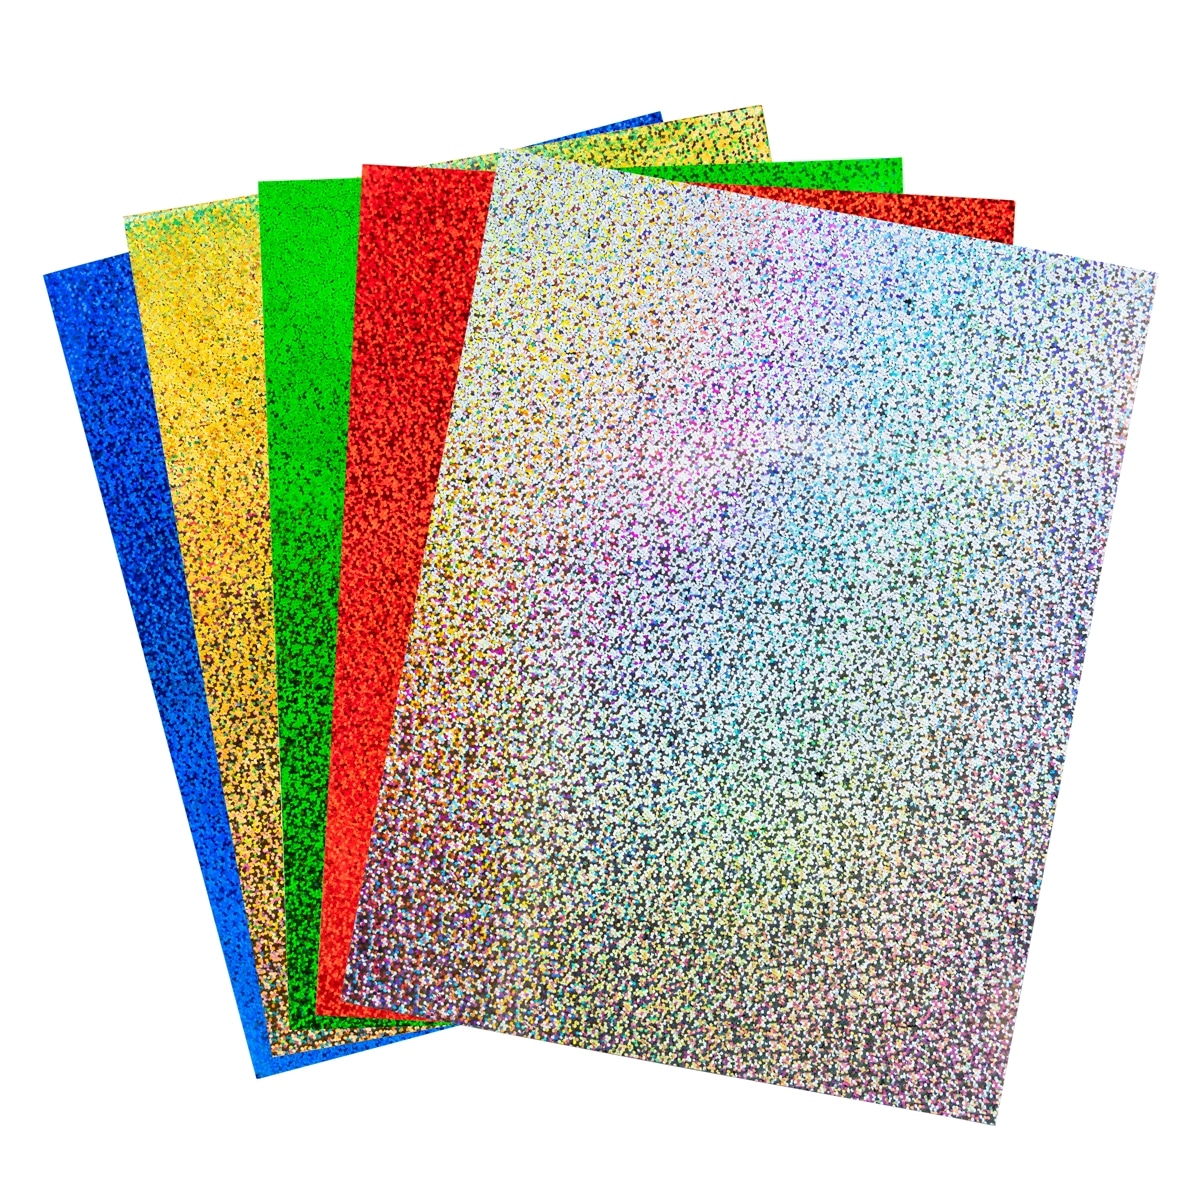 Self-Adhesive Holographic Paper 8.5 x 11"